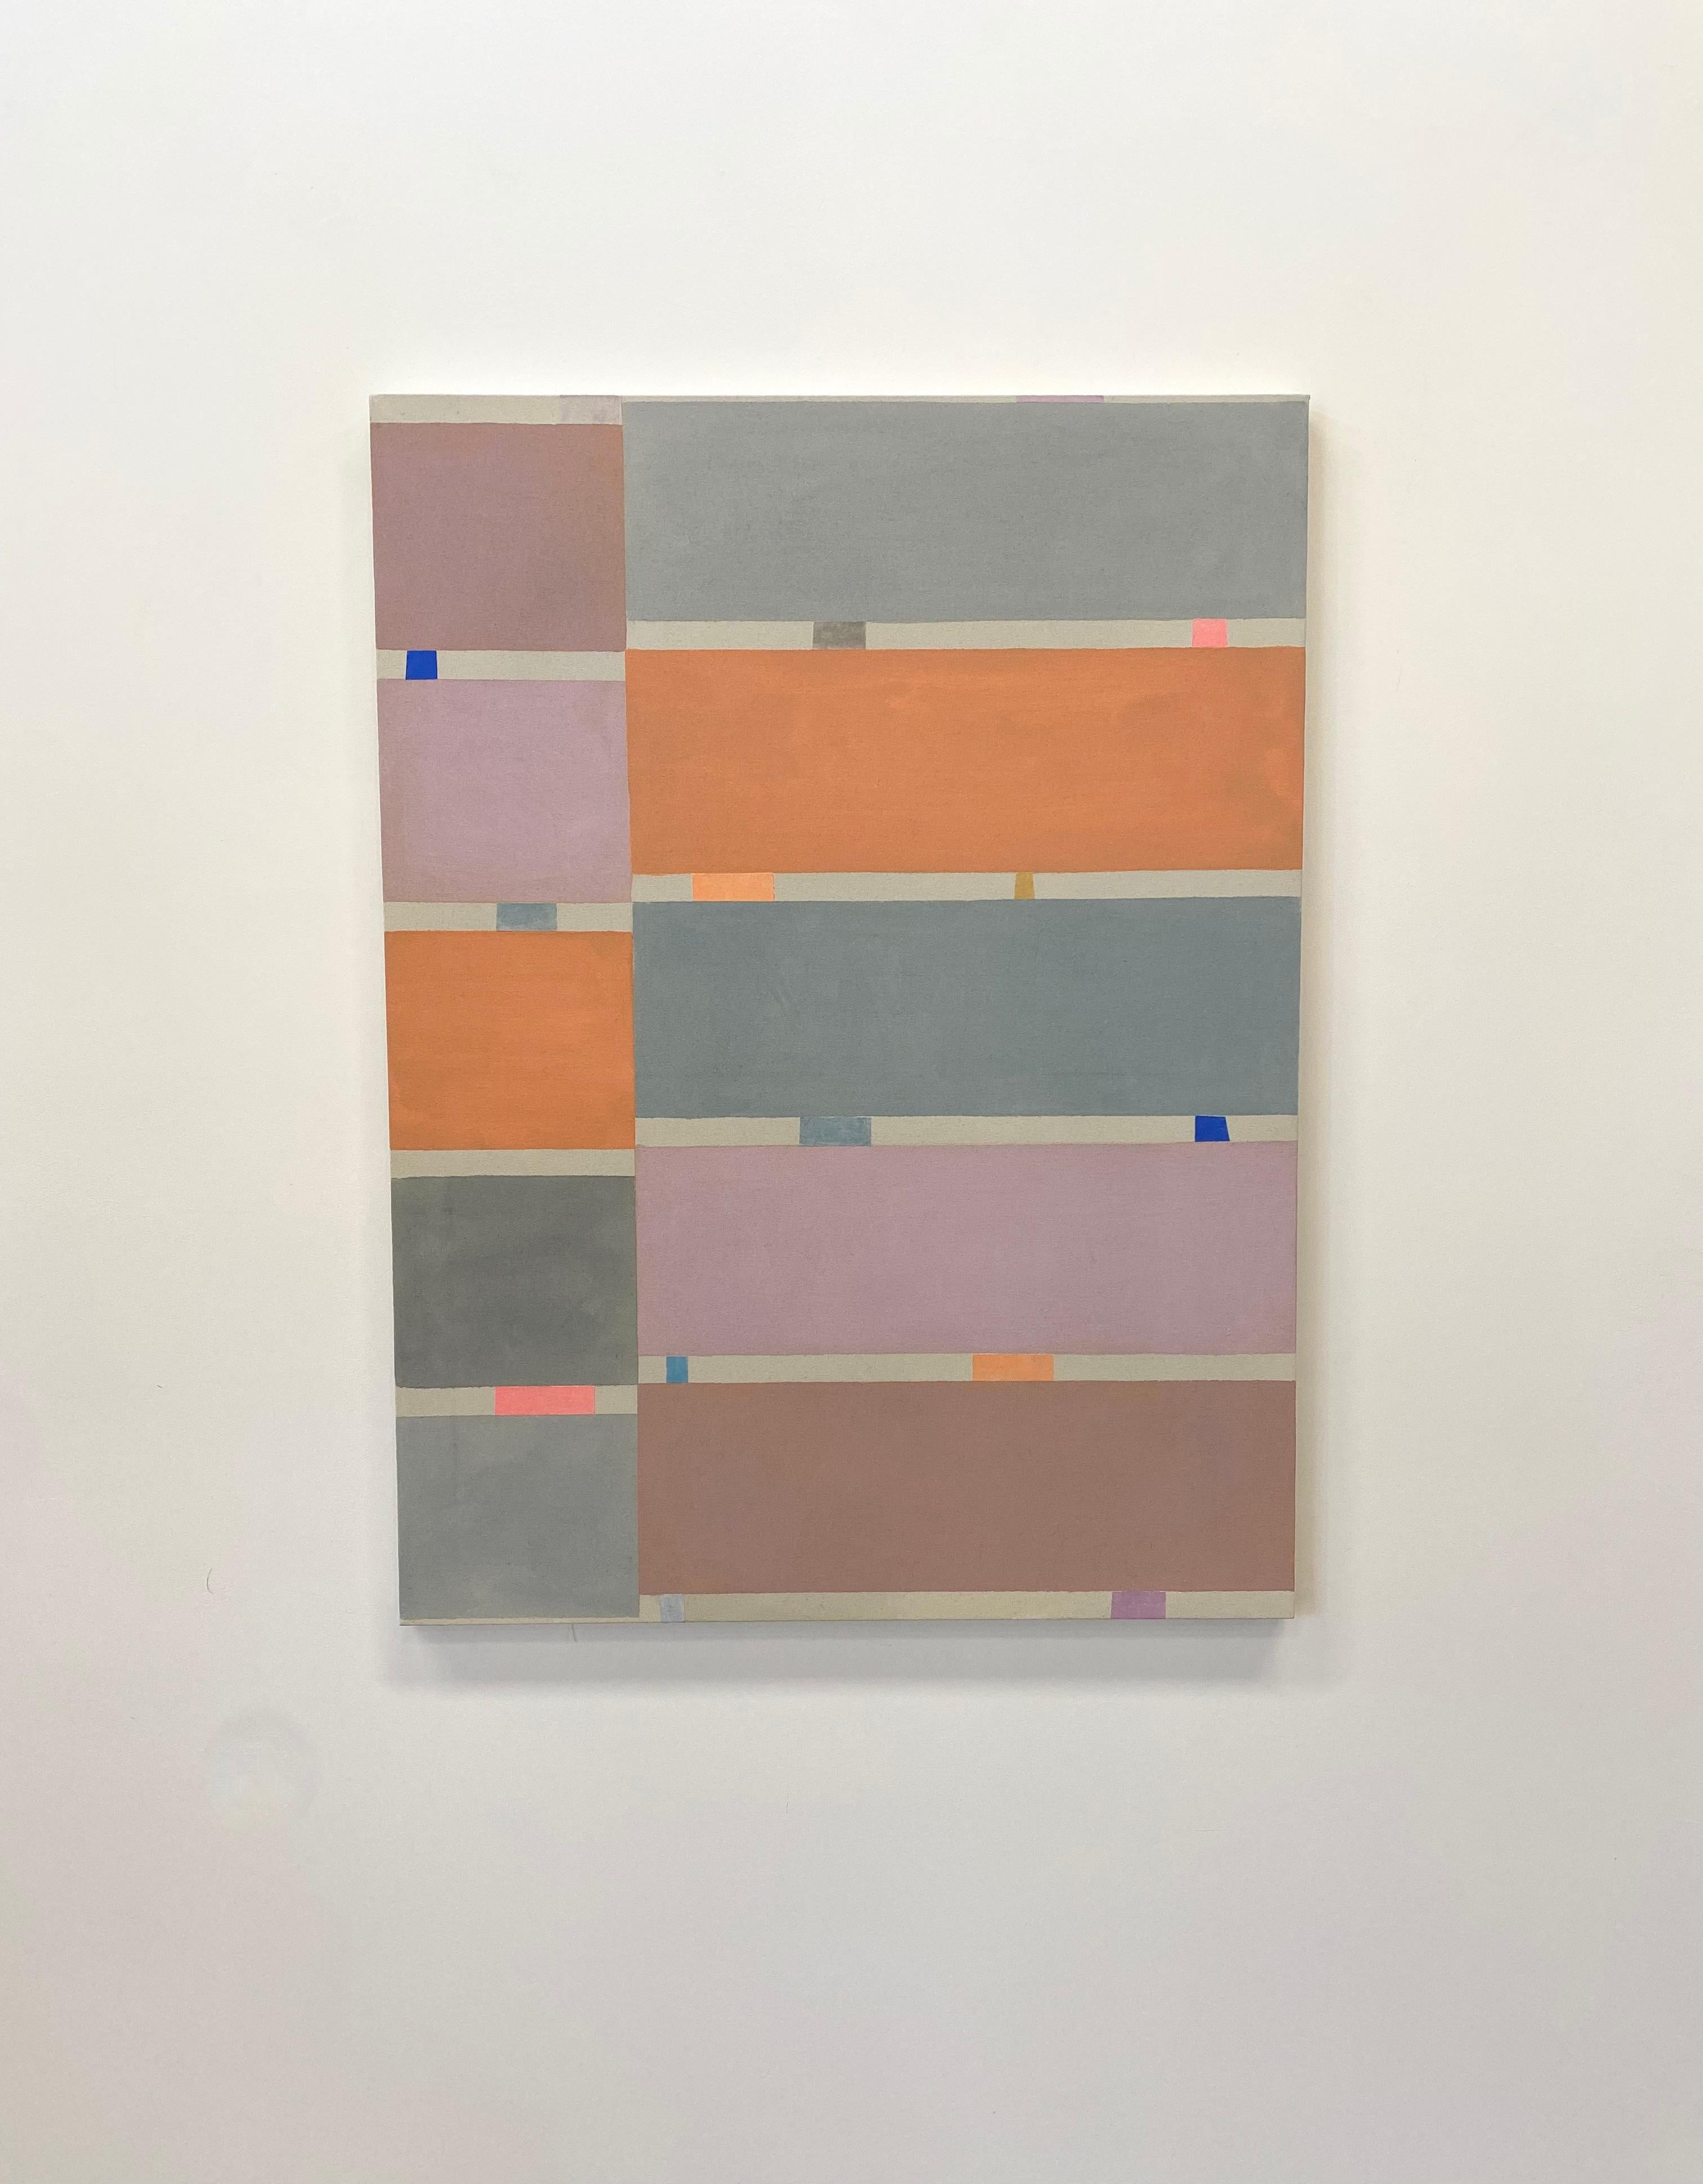 Grayviolet, Geometric Abstract, Orange Peach, Gray, Violet, Lilac Purple Stripes - Contemporary Painting by Elizabeth Gourlay